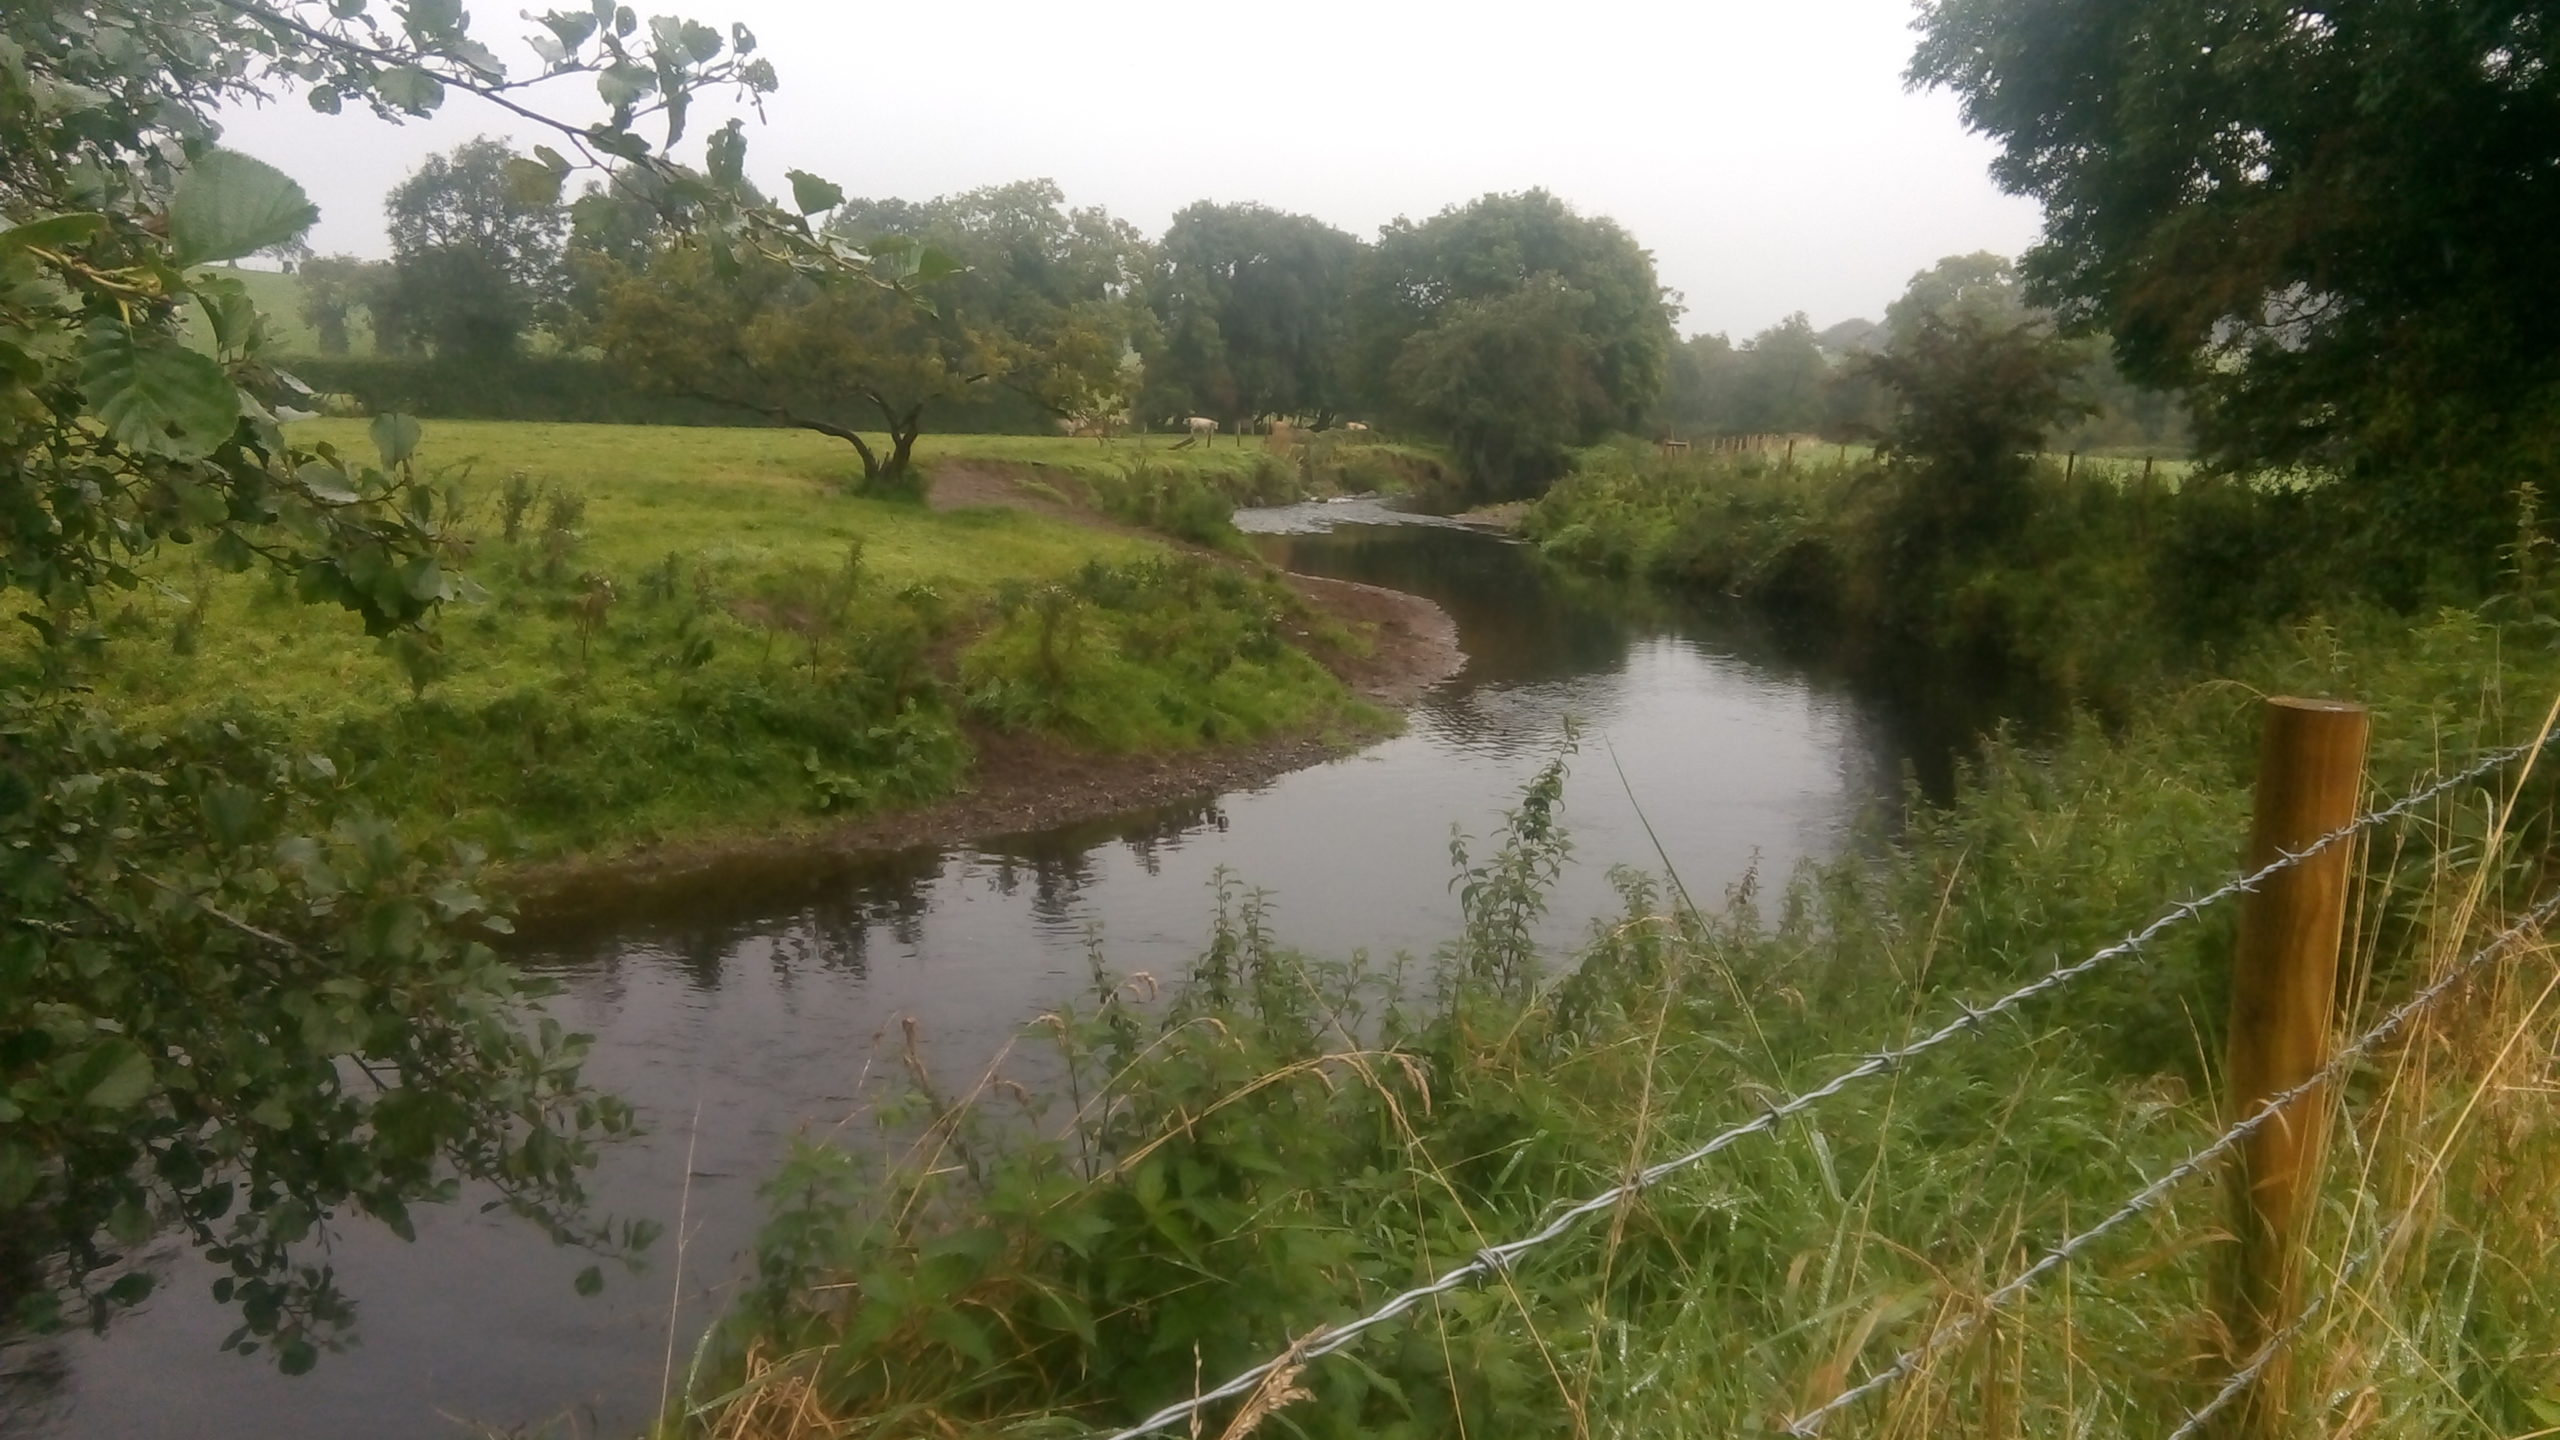 CatchmentCARE River Works on the Blackwater Catchment